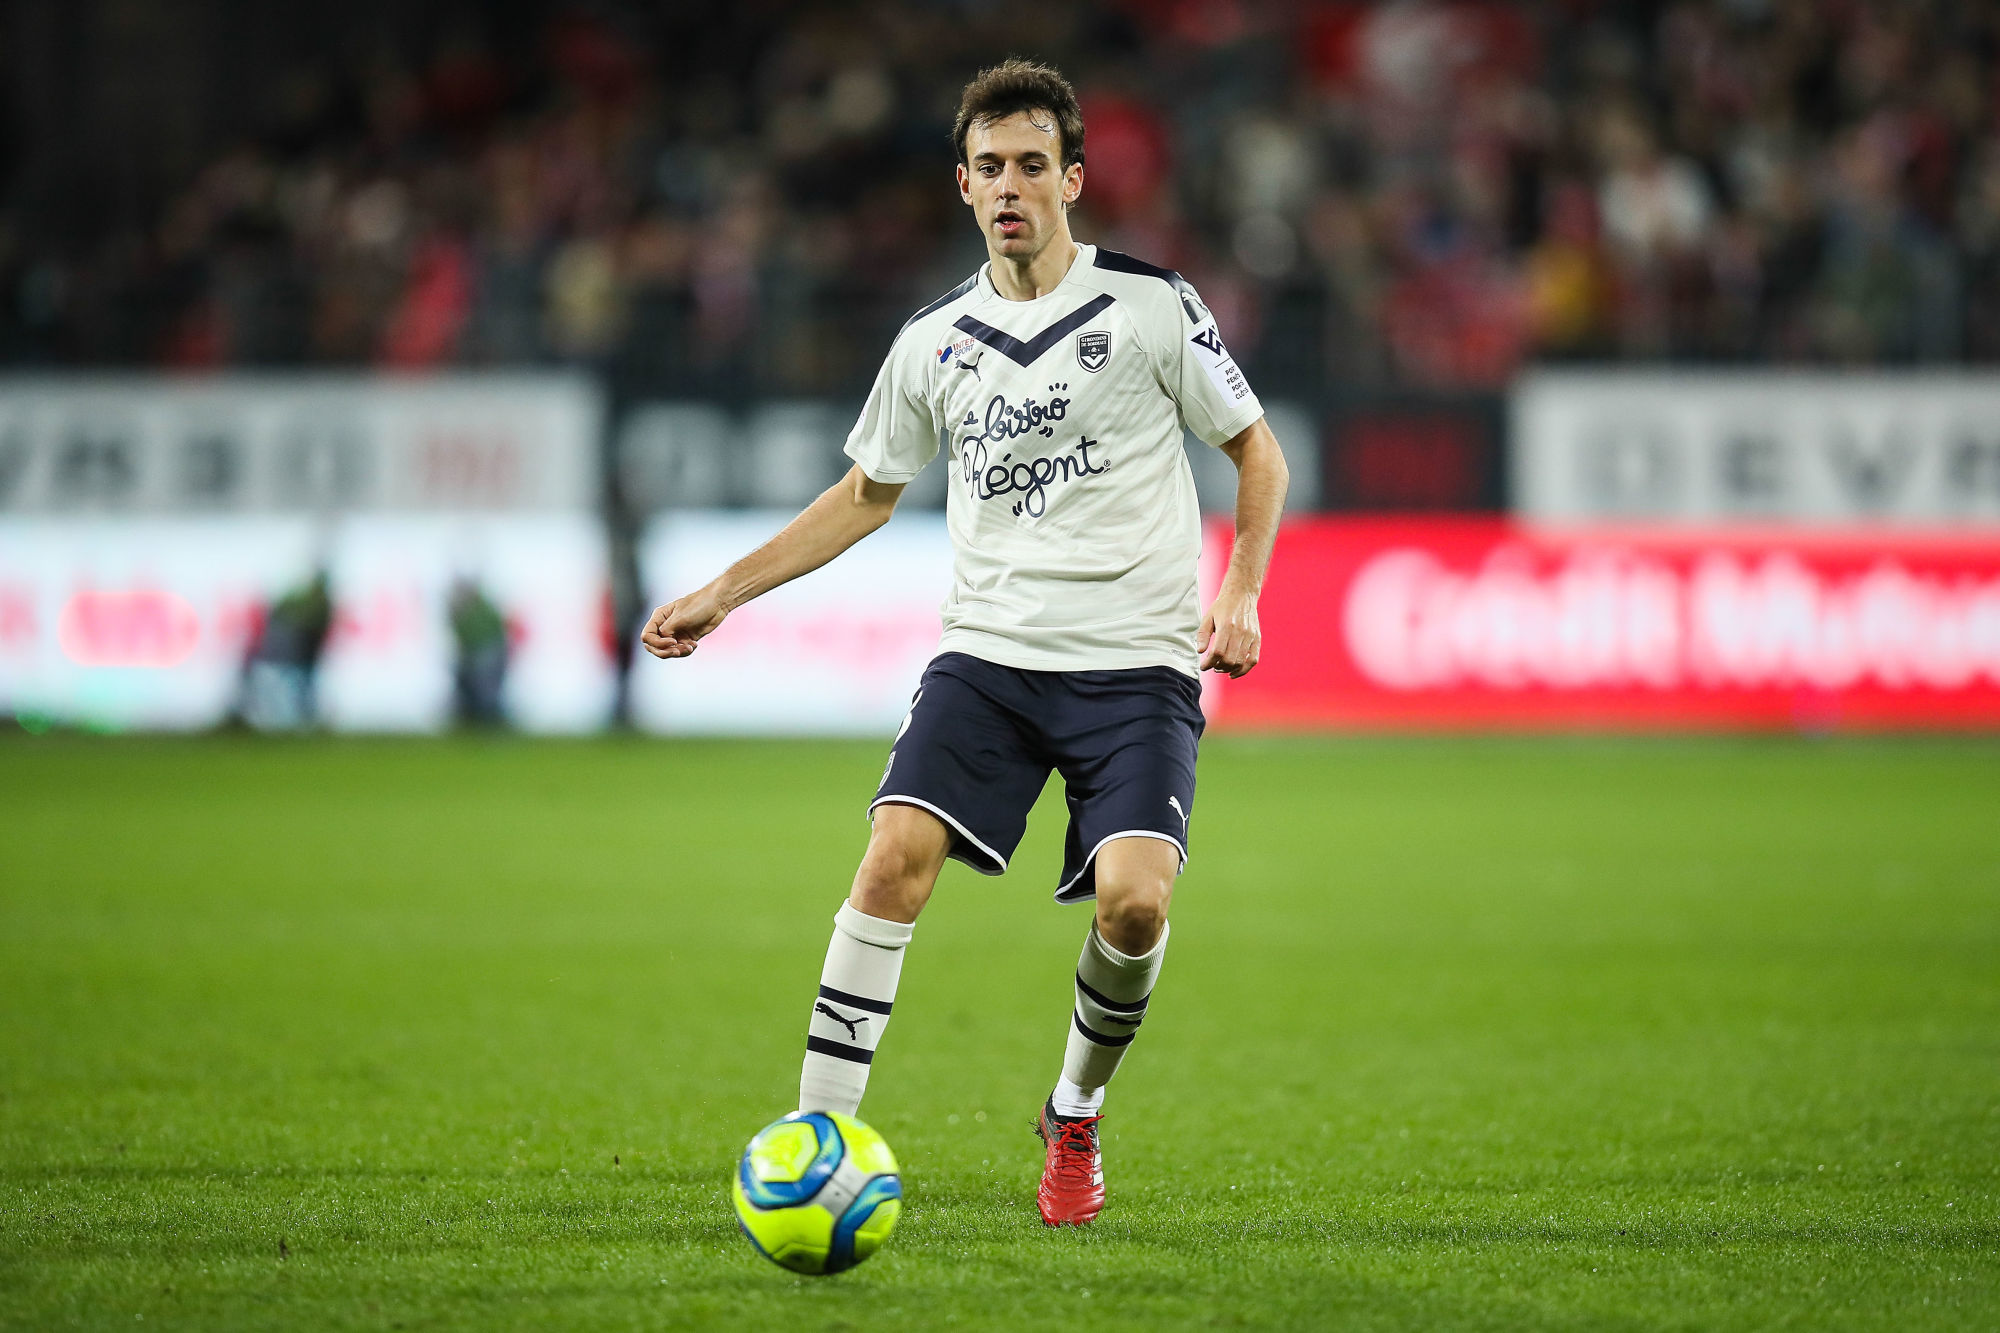 Ruben PARDO of Bordeaux during the Ligue 1 match between Stade Brest and Girondins Bordeaux at Stade Francis Le Ble on February 5, 2020 in Brest, France. (Photo by Vincent Michel/Icon Sport) - Ruben PARDO - Stade Francis-Le-Blé - Brest (France)